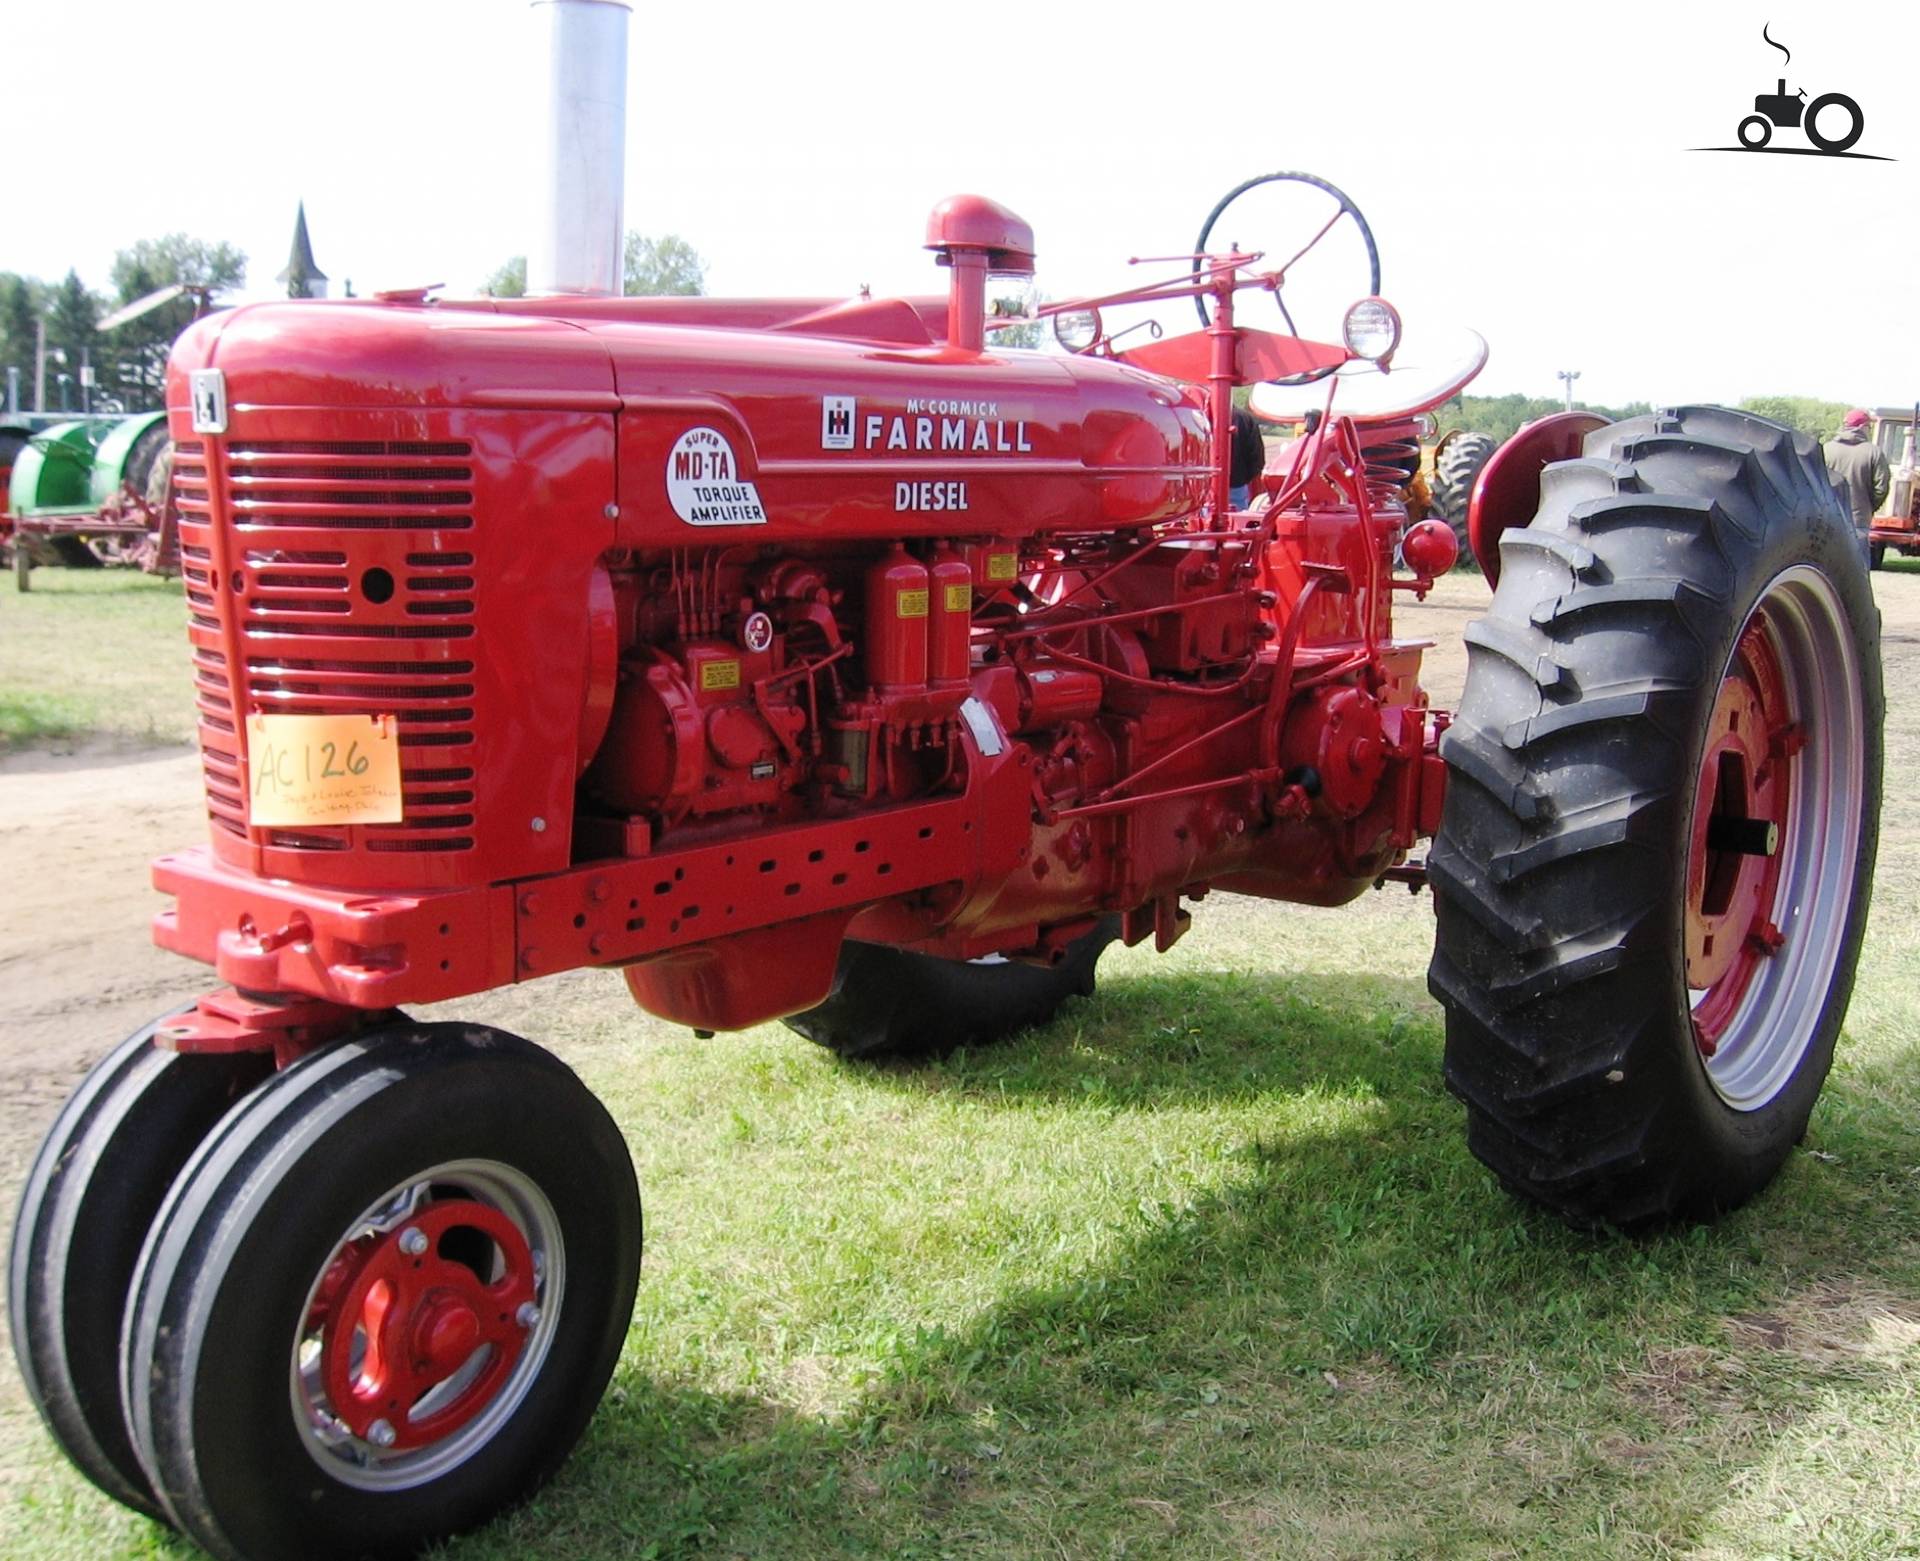 Farmall Super MD-TA Specs and data - Everything about the Farmall ...